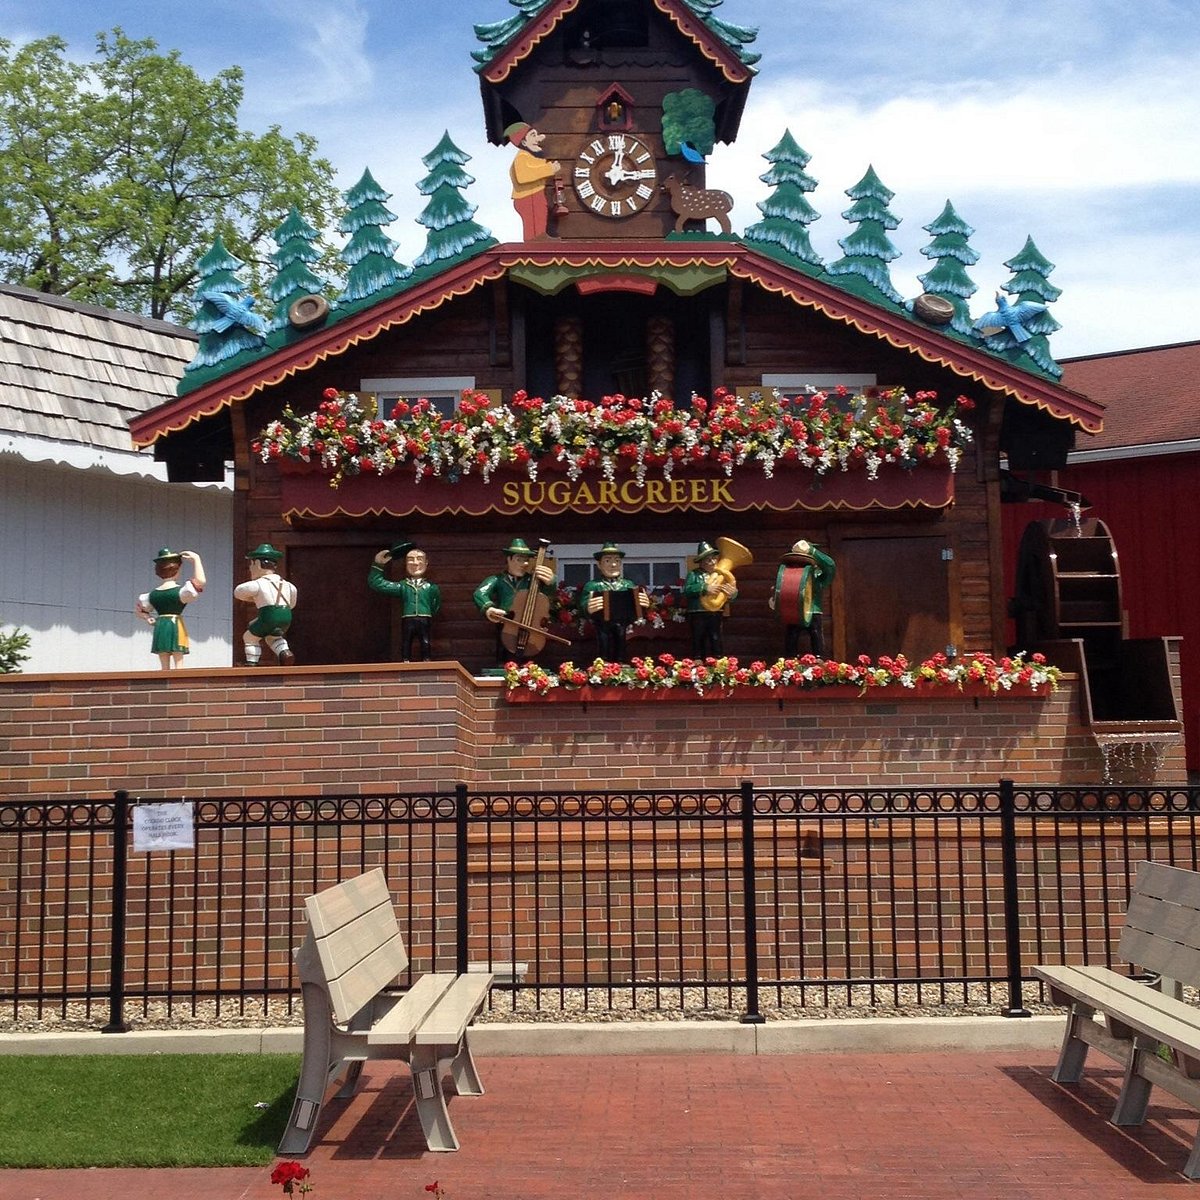 World's Largest Cuckoo Clock (Sugarcreek) 2021 All You Need to Know